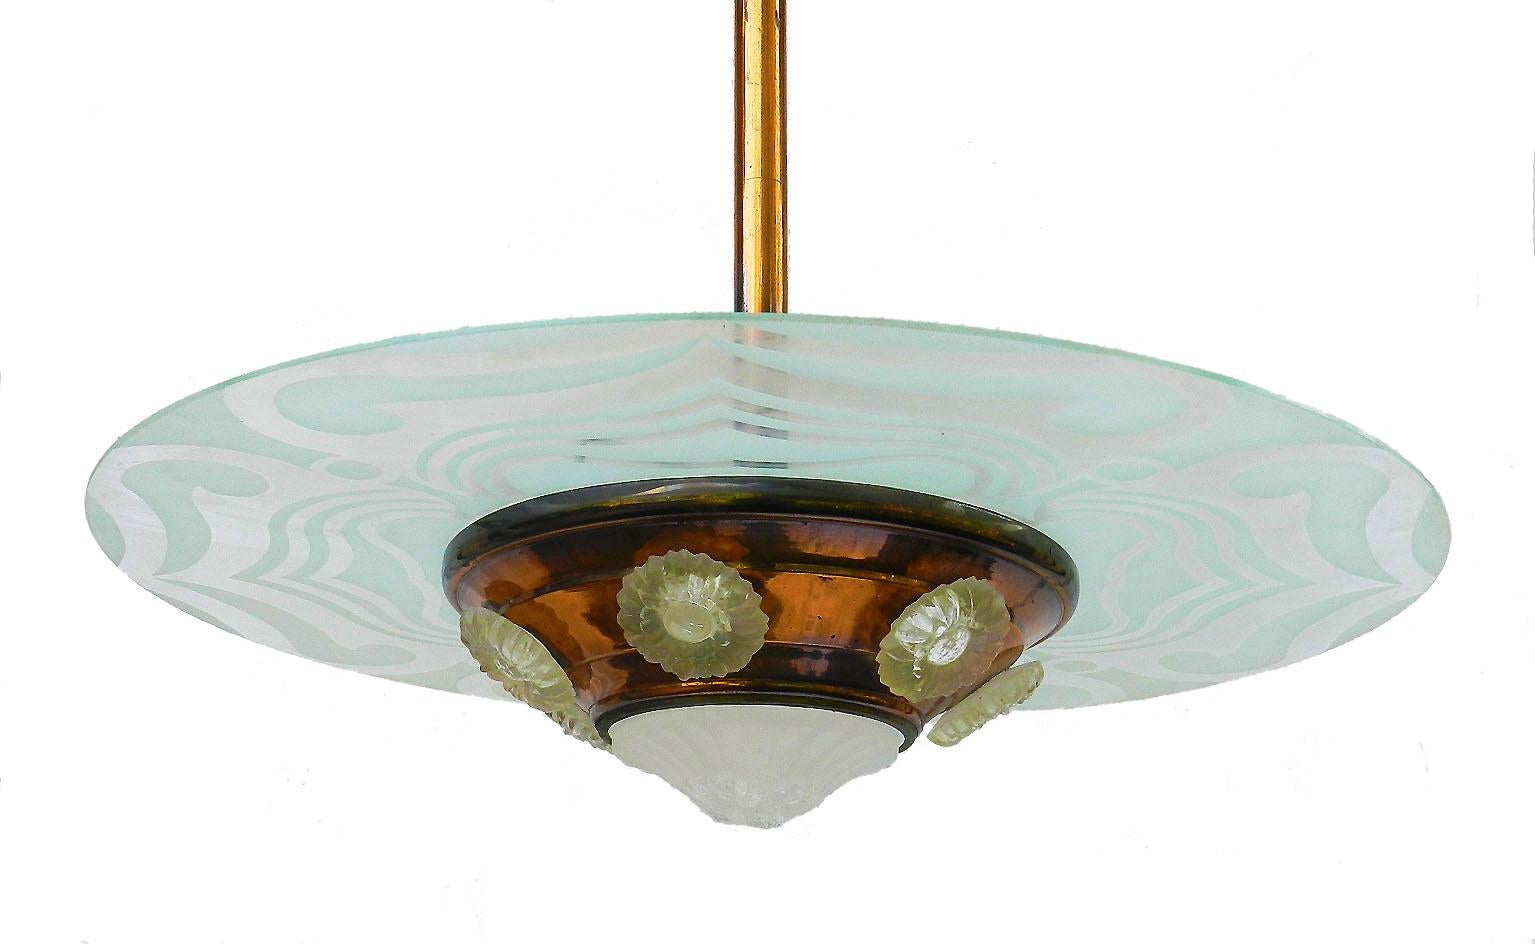 Art Deco ceiling light UFO copper with Ezan glass French
All Original 
Etched glass disc
This can be re-wired to USA or UK and European standards
Good vintage condition with minor signs of age and use.

  